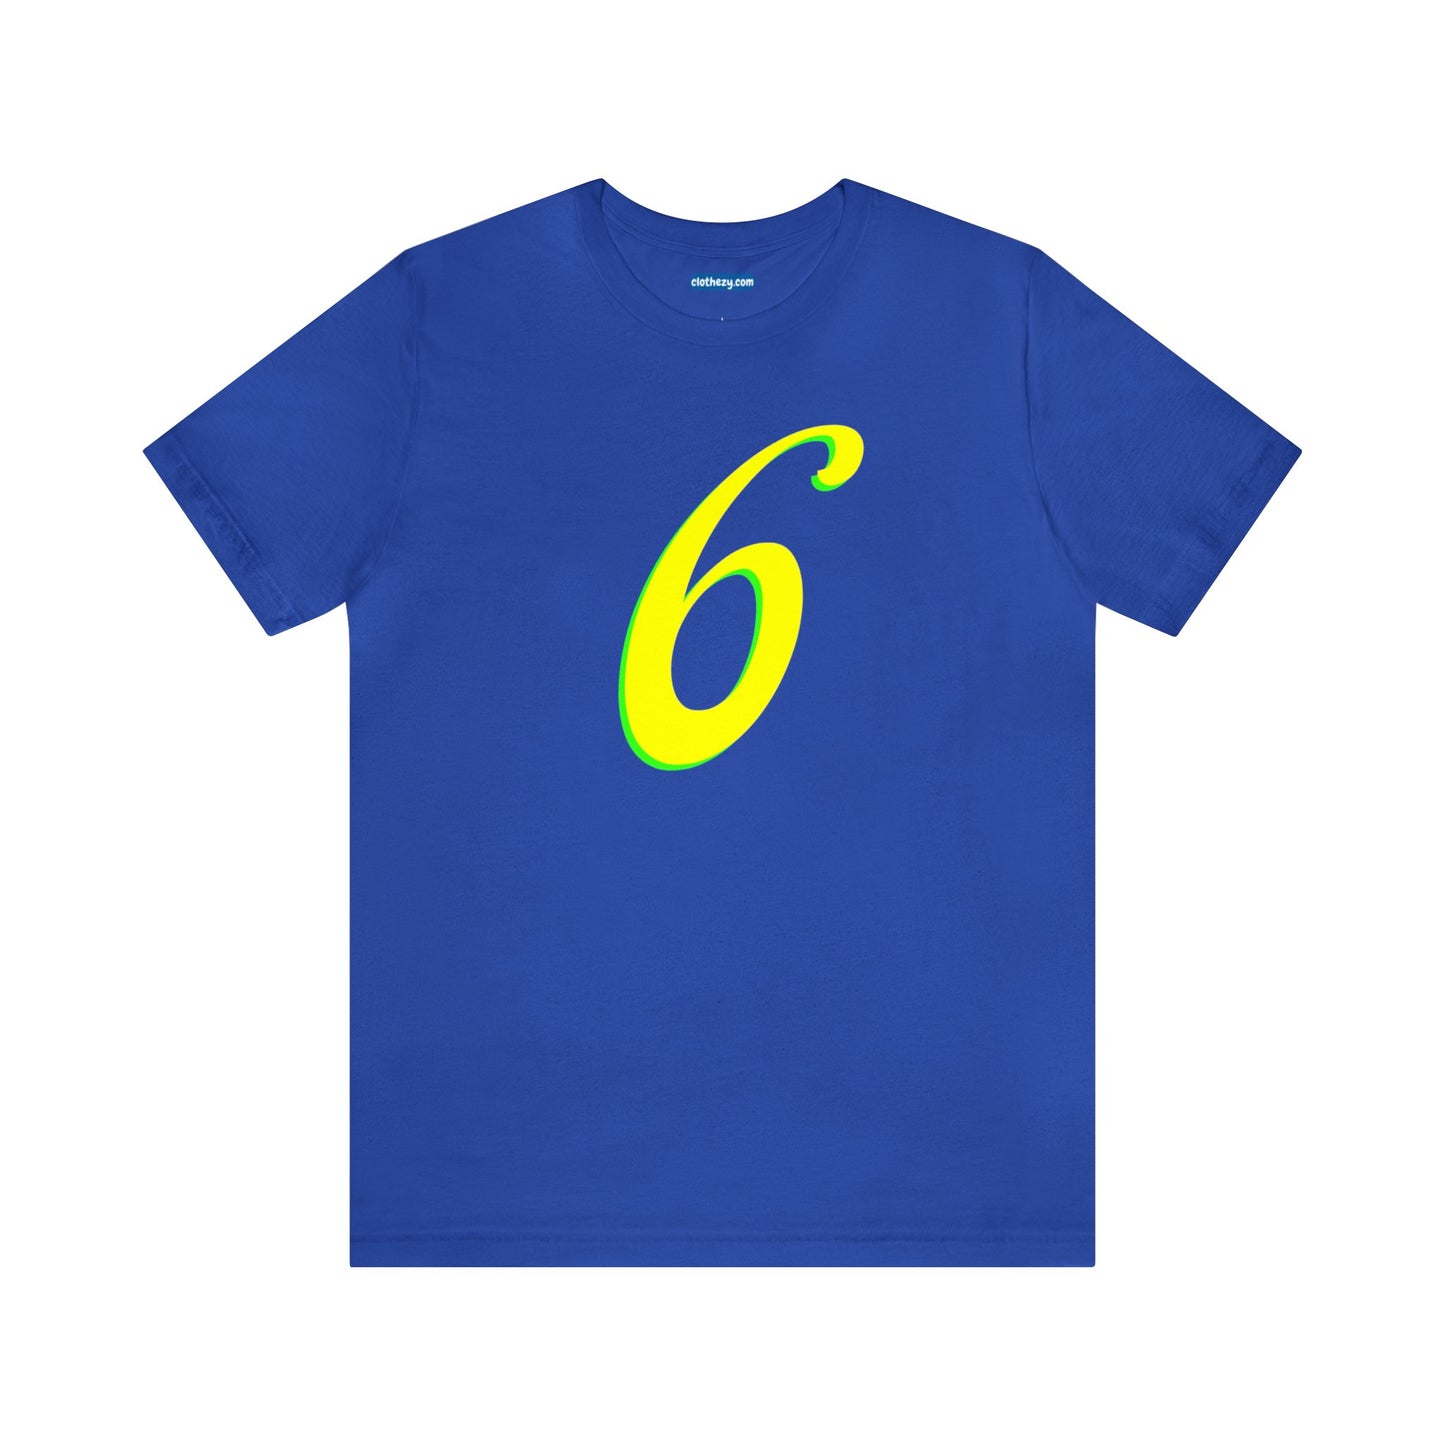 Number 6 Design - Soft Cotton Tee for birthdays and celebrations, Gift for friends and family, Multiple Options by clothezy.com in White Size Small - Buy Now